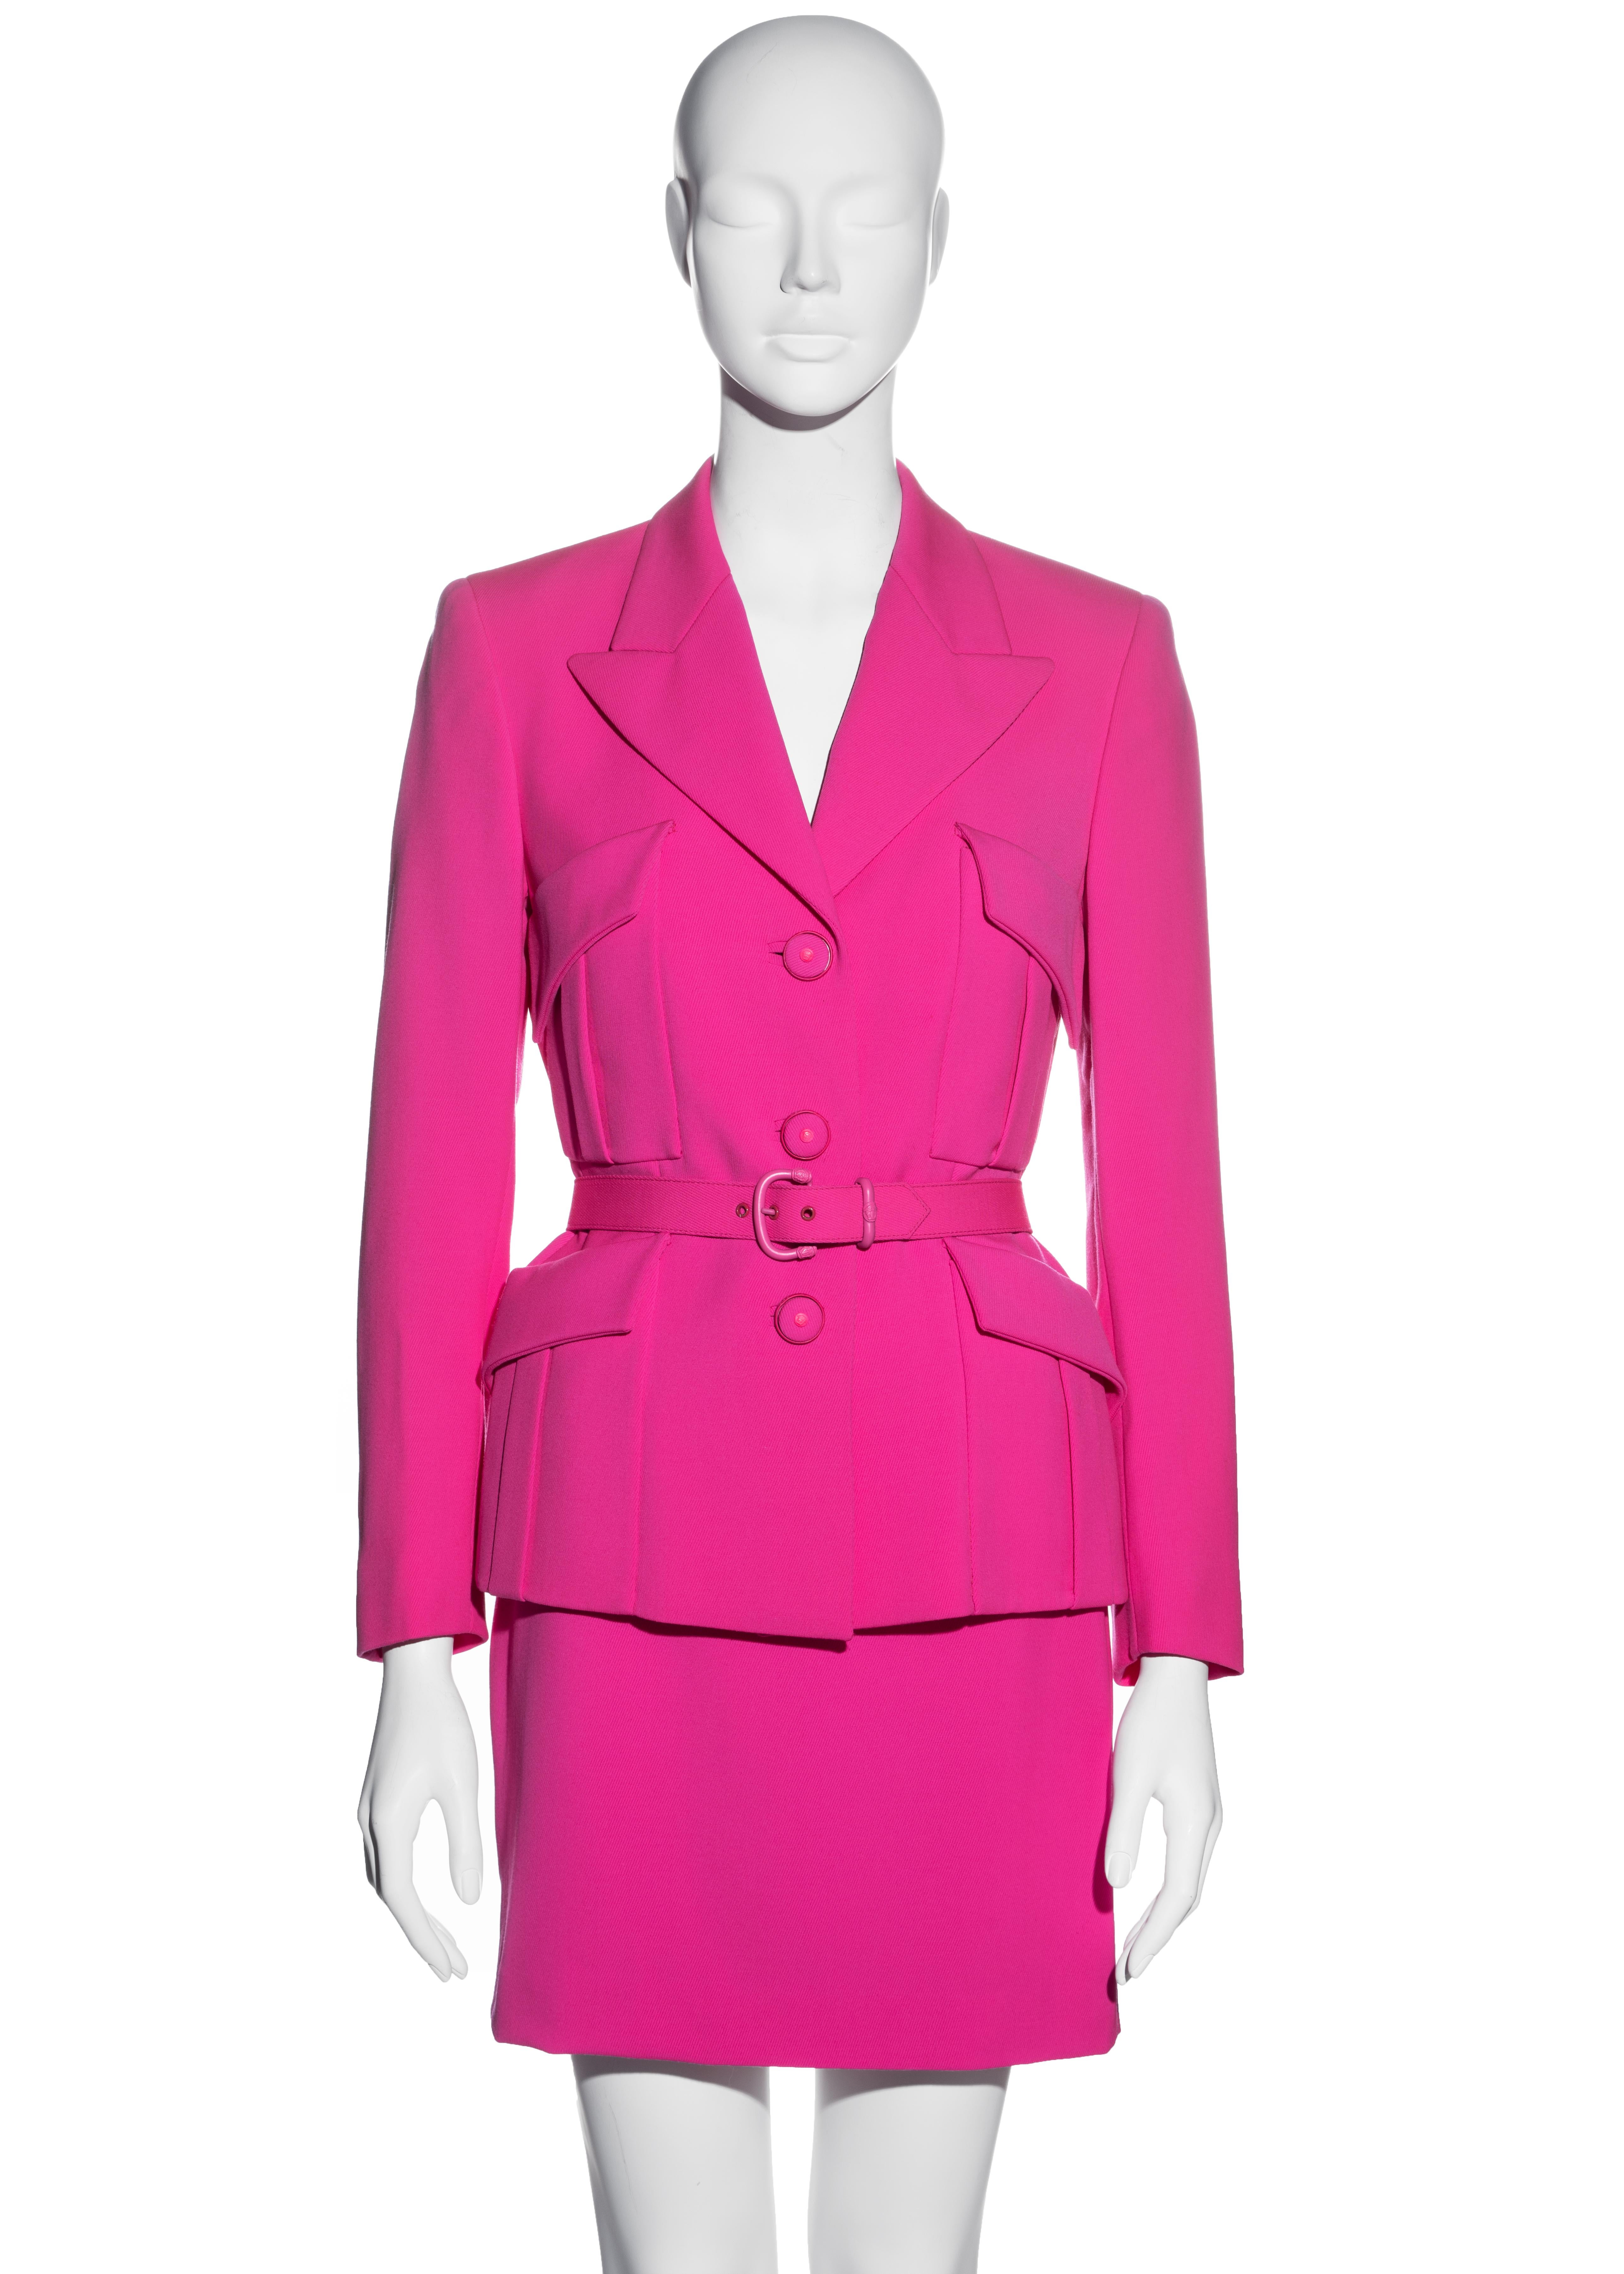 ▪ Gianni Versace neon pink wool monochromatic skirt suit 
▪ 100% Wool, Lining 100% Rayon 
▪ Single-breasted fitted blazer jacket
▪ Four front flap pockets 
▪ Matching belt with pink hardware 
▪ Fabric covered buttons with Medusa hardware 
▪ Matching